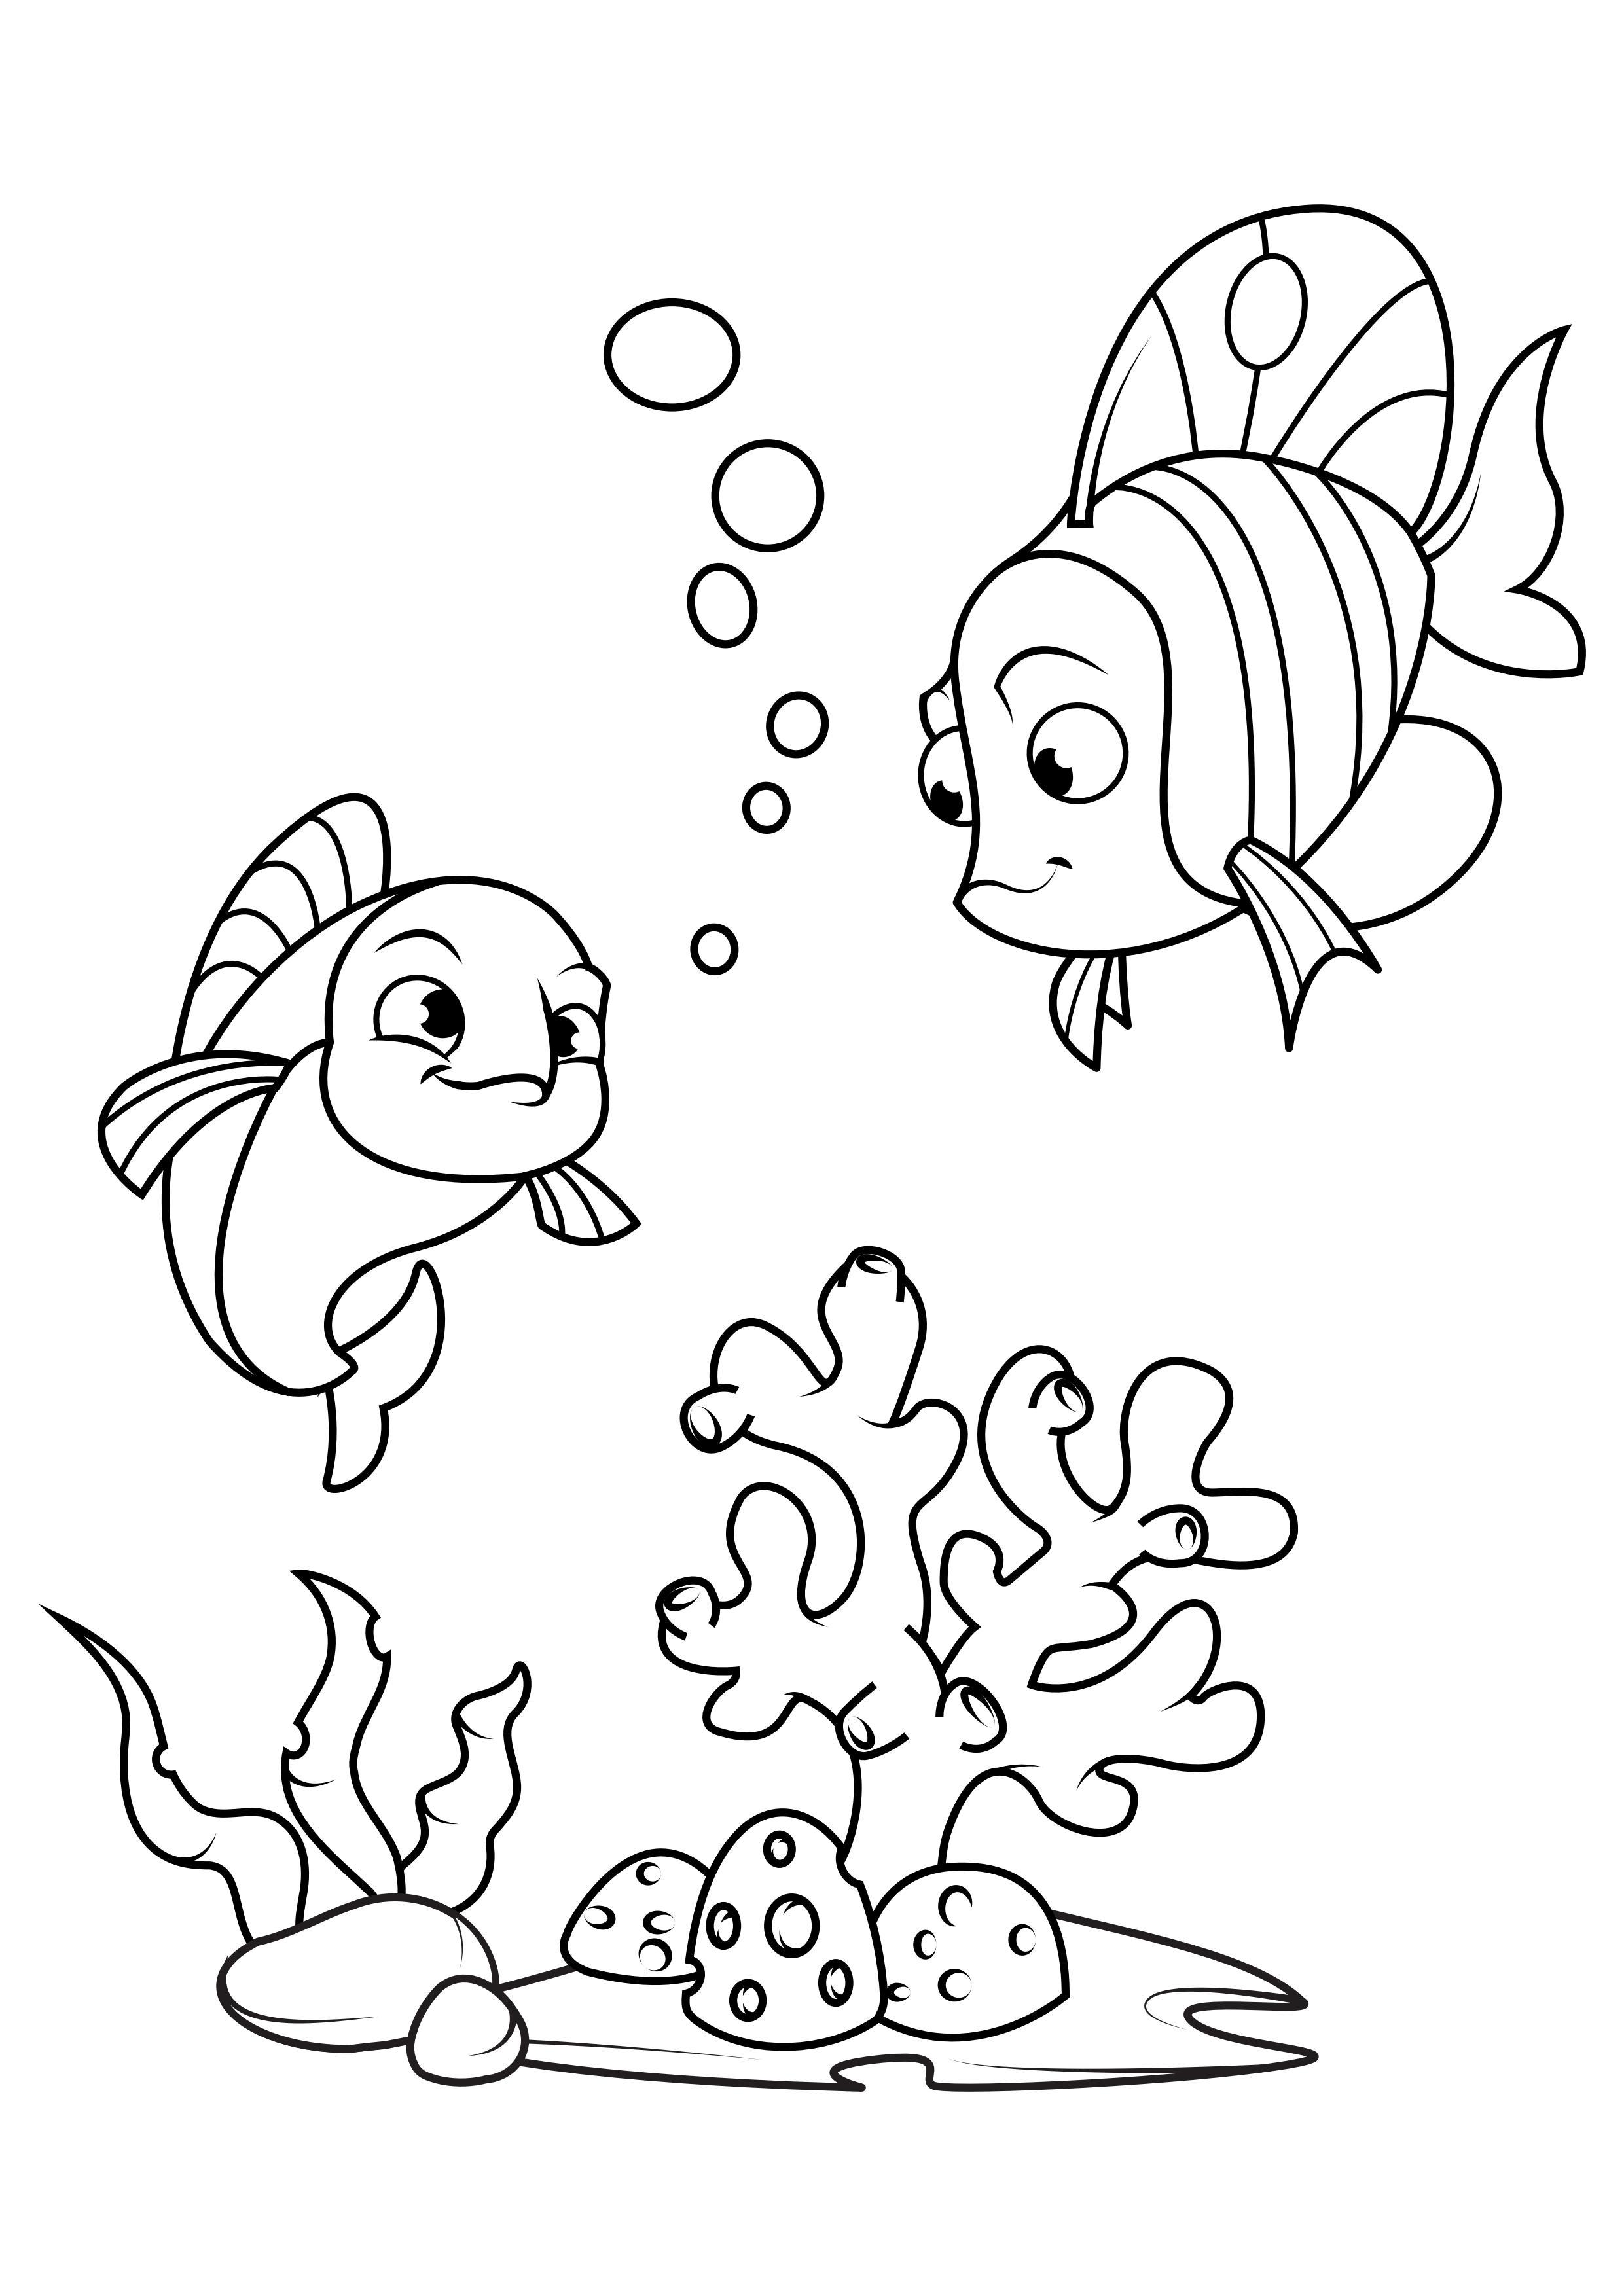 Coloring page fish with friend in the sea